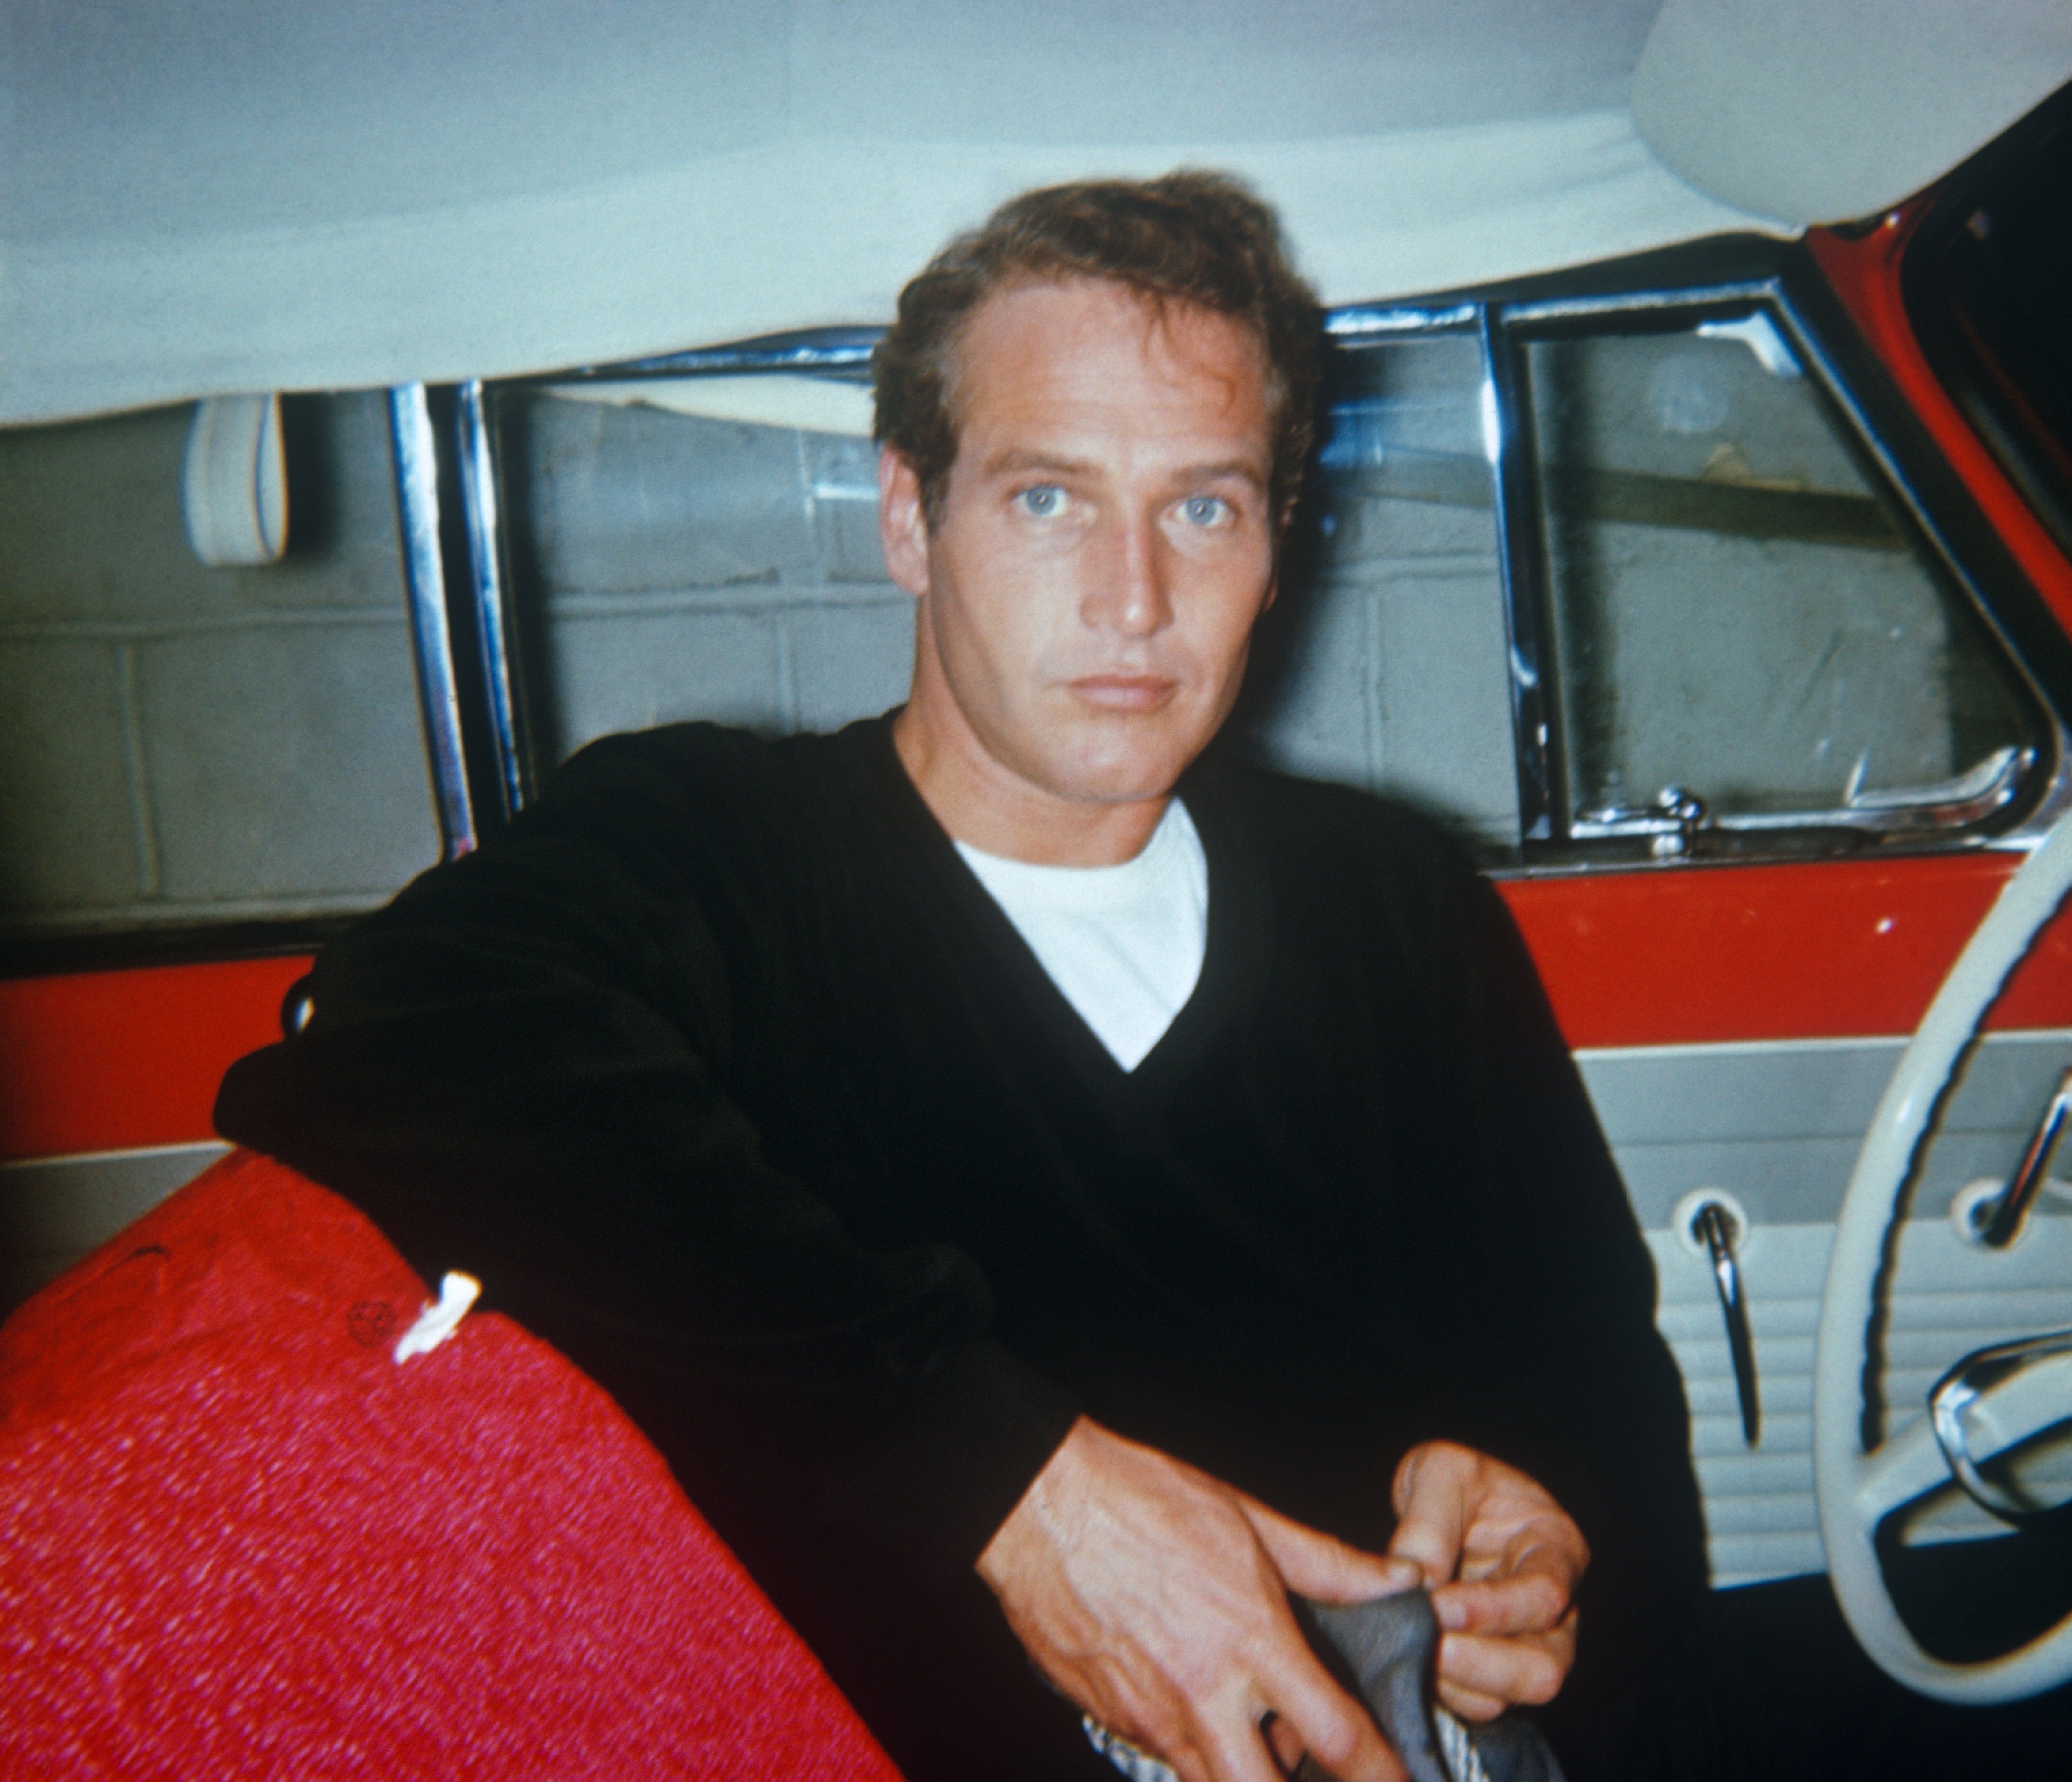 Paul Newman, pictured in the 1950s, had a complex relationship with his own stardom. (Art Zelin/Getty Images)